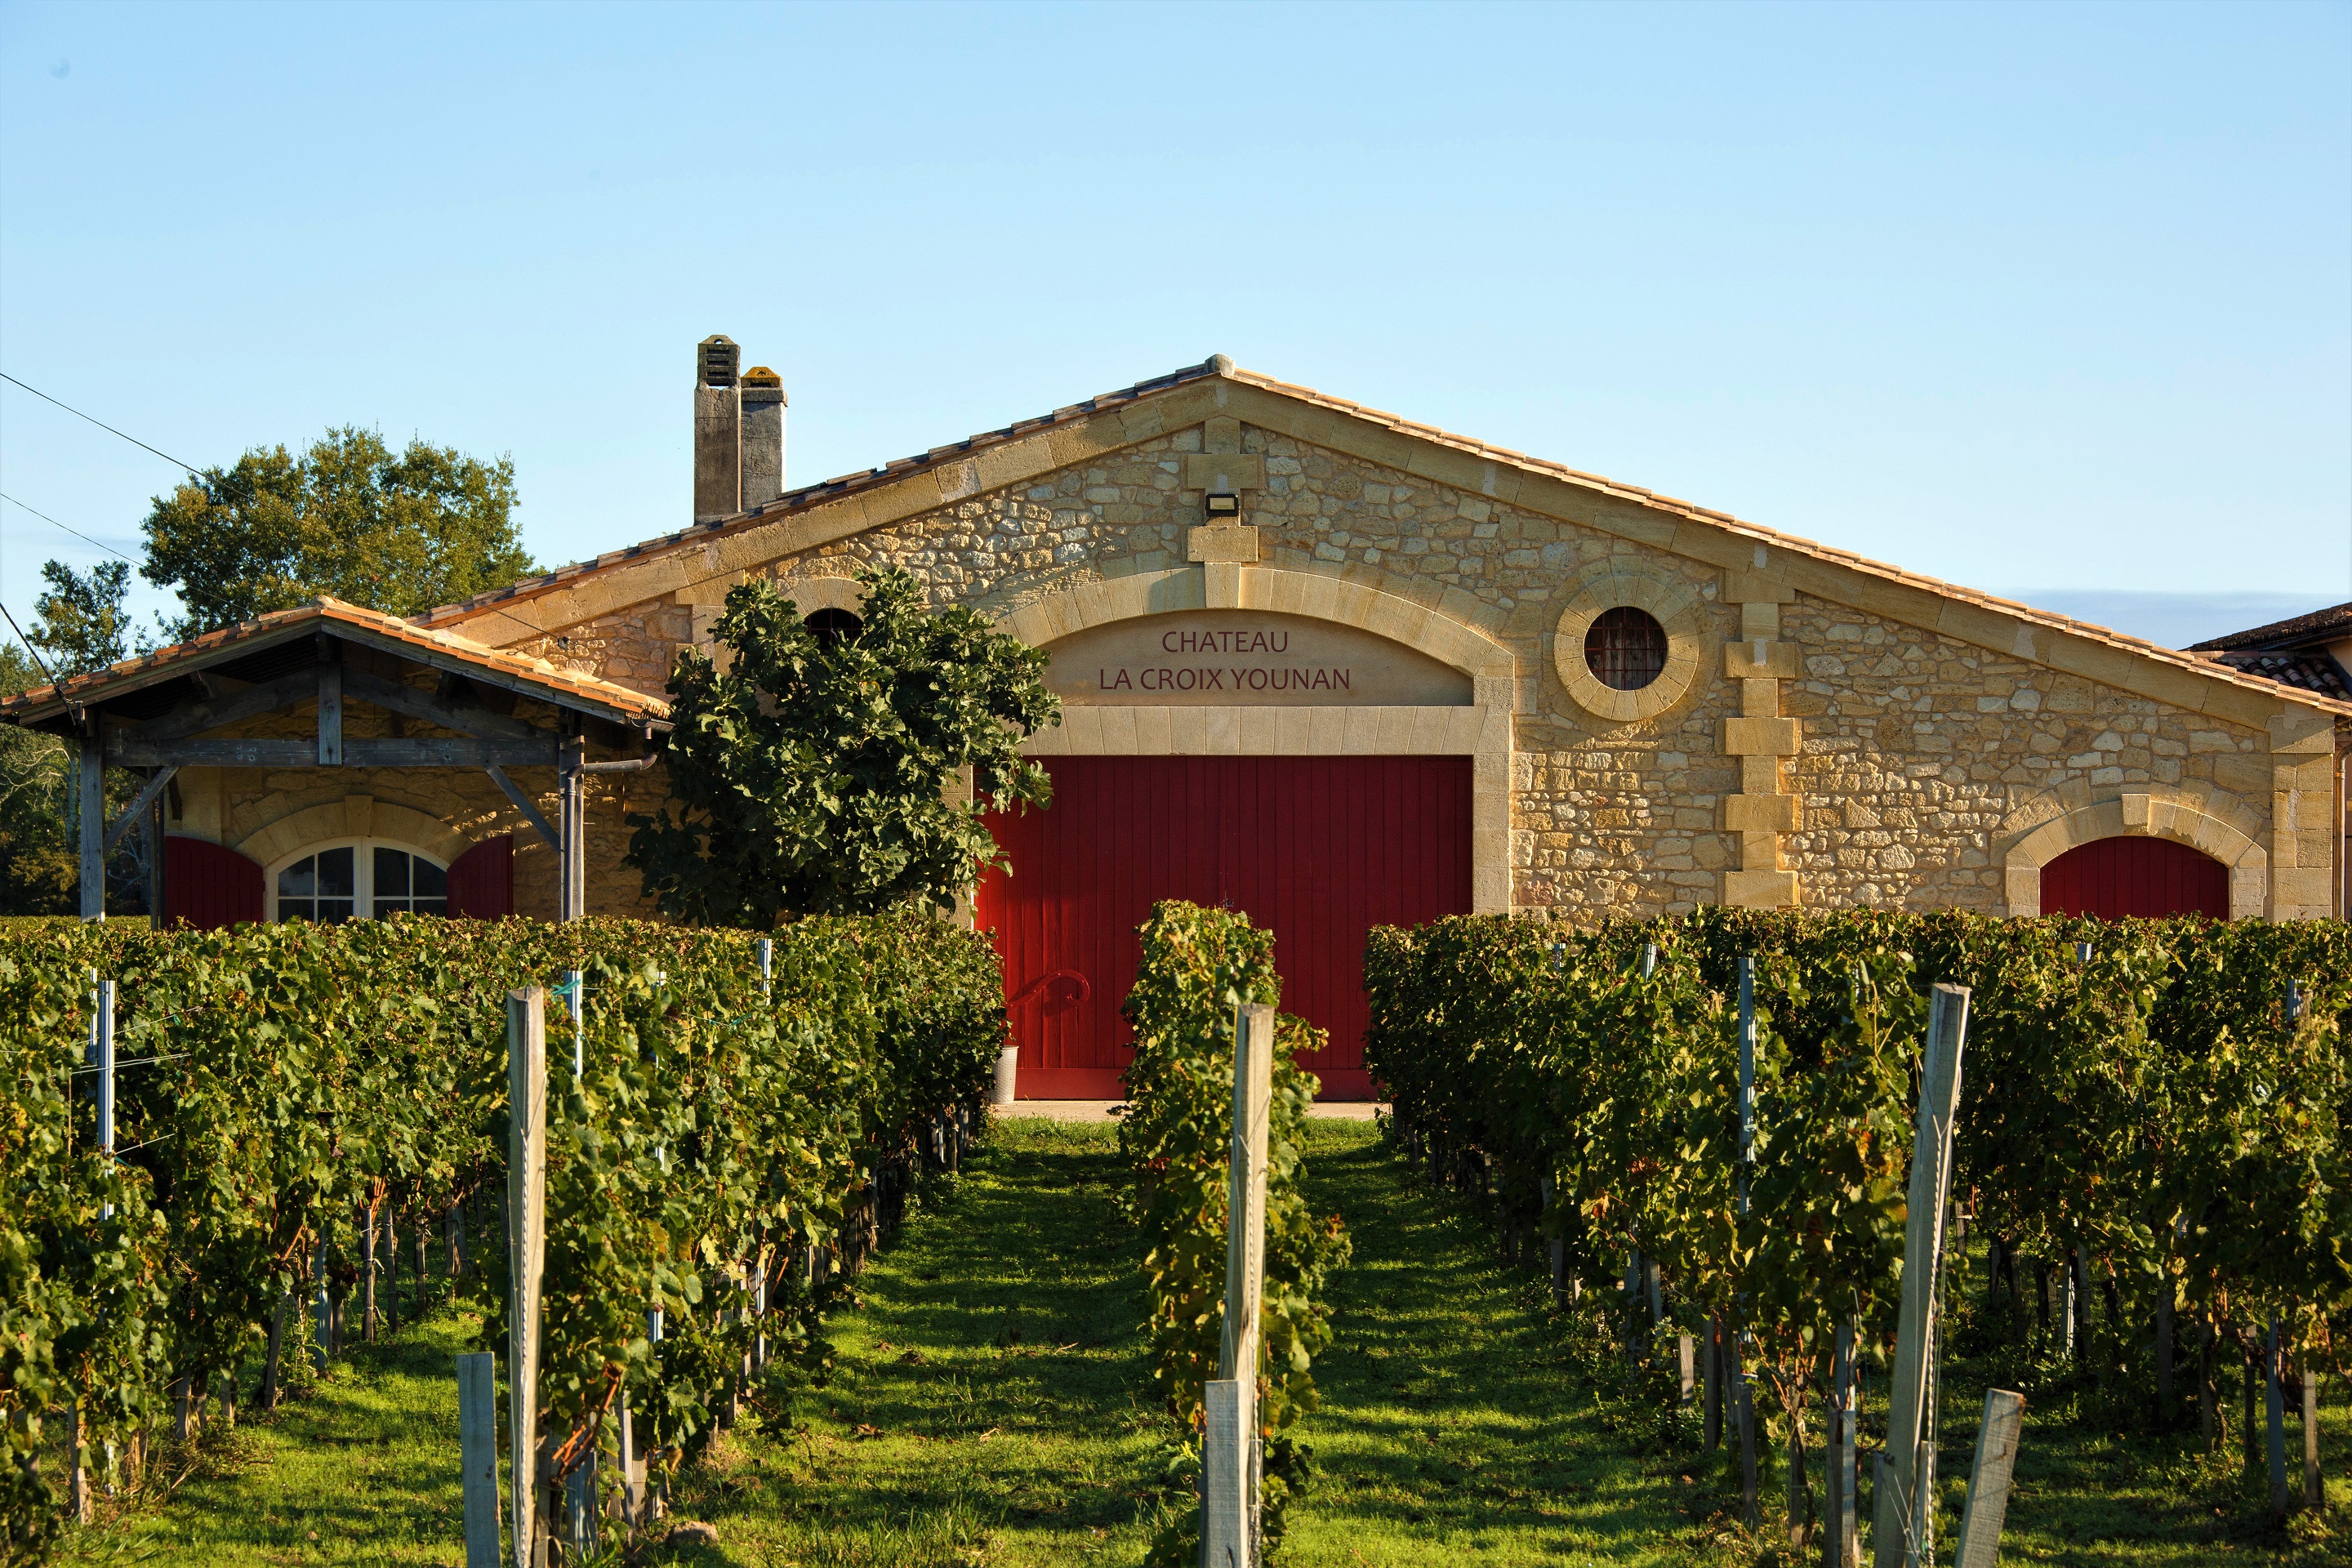 Château La Croix Younan was accepted into the prestigious Grand Cercle des Vins de Bordeaux. The selection represented the first time an American-owned château from Saint-Émilion had been included in The Grand Cercle’s ‘Rive Droite’, an elite selection of 113 wines representing winemaking excellence in Bordeaux’s Right Bank.